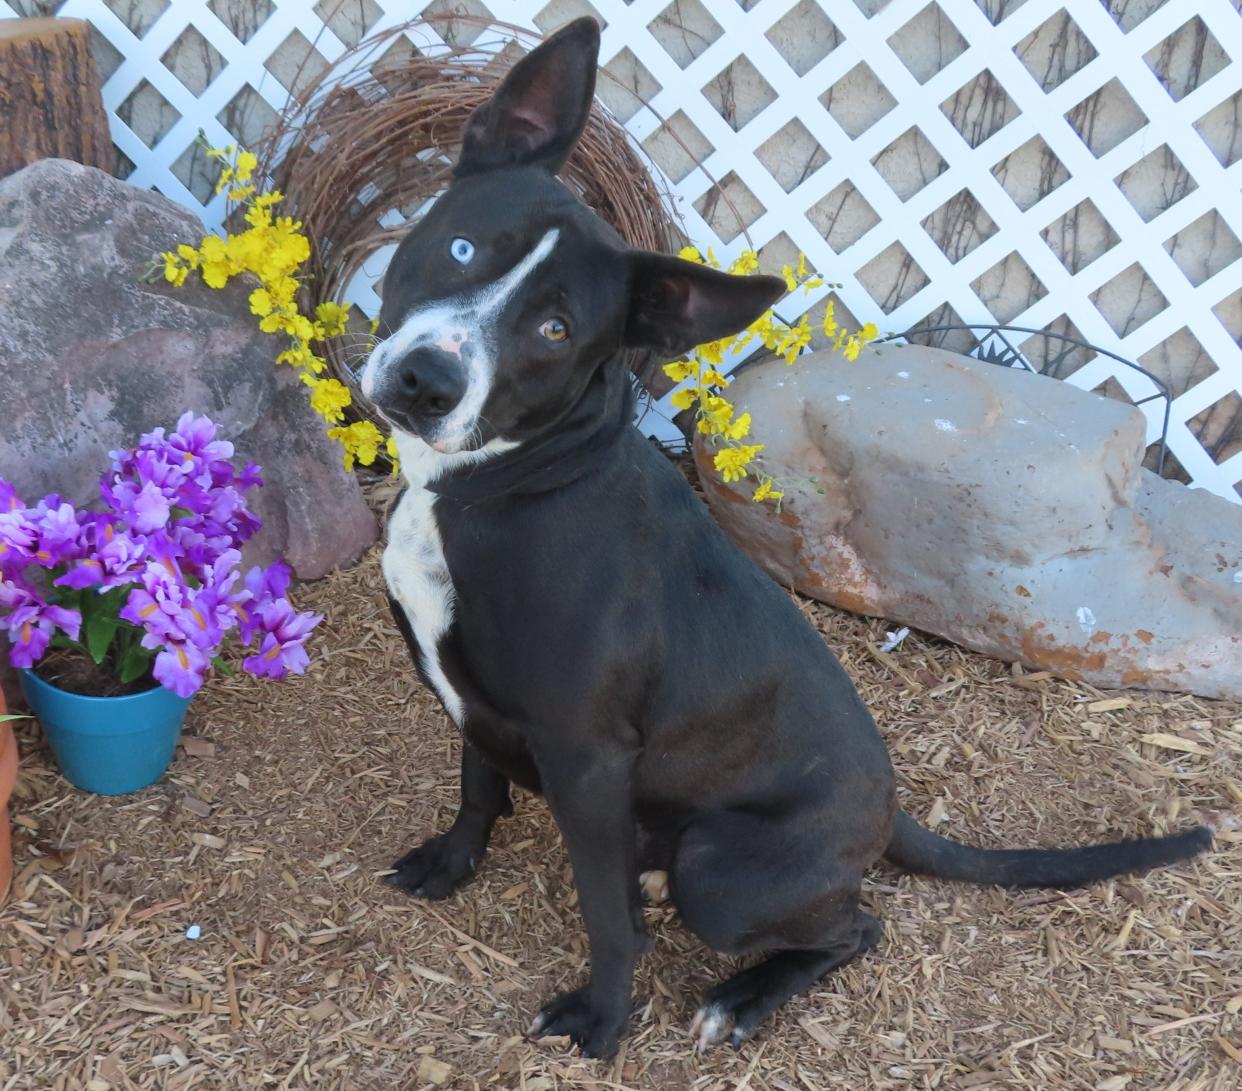 Chicano, ID #424576, came into the shelter as a stray on March 6. He likes to go to coffee shops for pup cups and to meet people and other dogs. Chicano is a handsome and friendly 1-year-old, 63-pound pit bull terrier and Labrador mix. We are working with Chicano on not tugging on a leash. He likes car rides and tummy rubs. To meet Chicano, go to the Oklahoma City Animal Shelter at 2811 SE 29 between noon and 5 p.m. Tuesday through Saturday. Go online to www.okc.gov or www.okc.petfinder.com to see all the cats and dogs available for adoption. The shelter is in need of blankets, comforters, and towels.